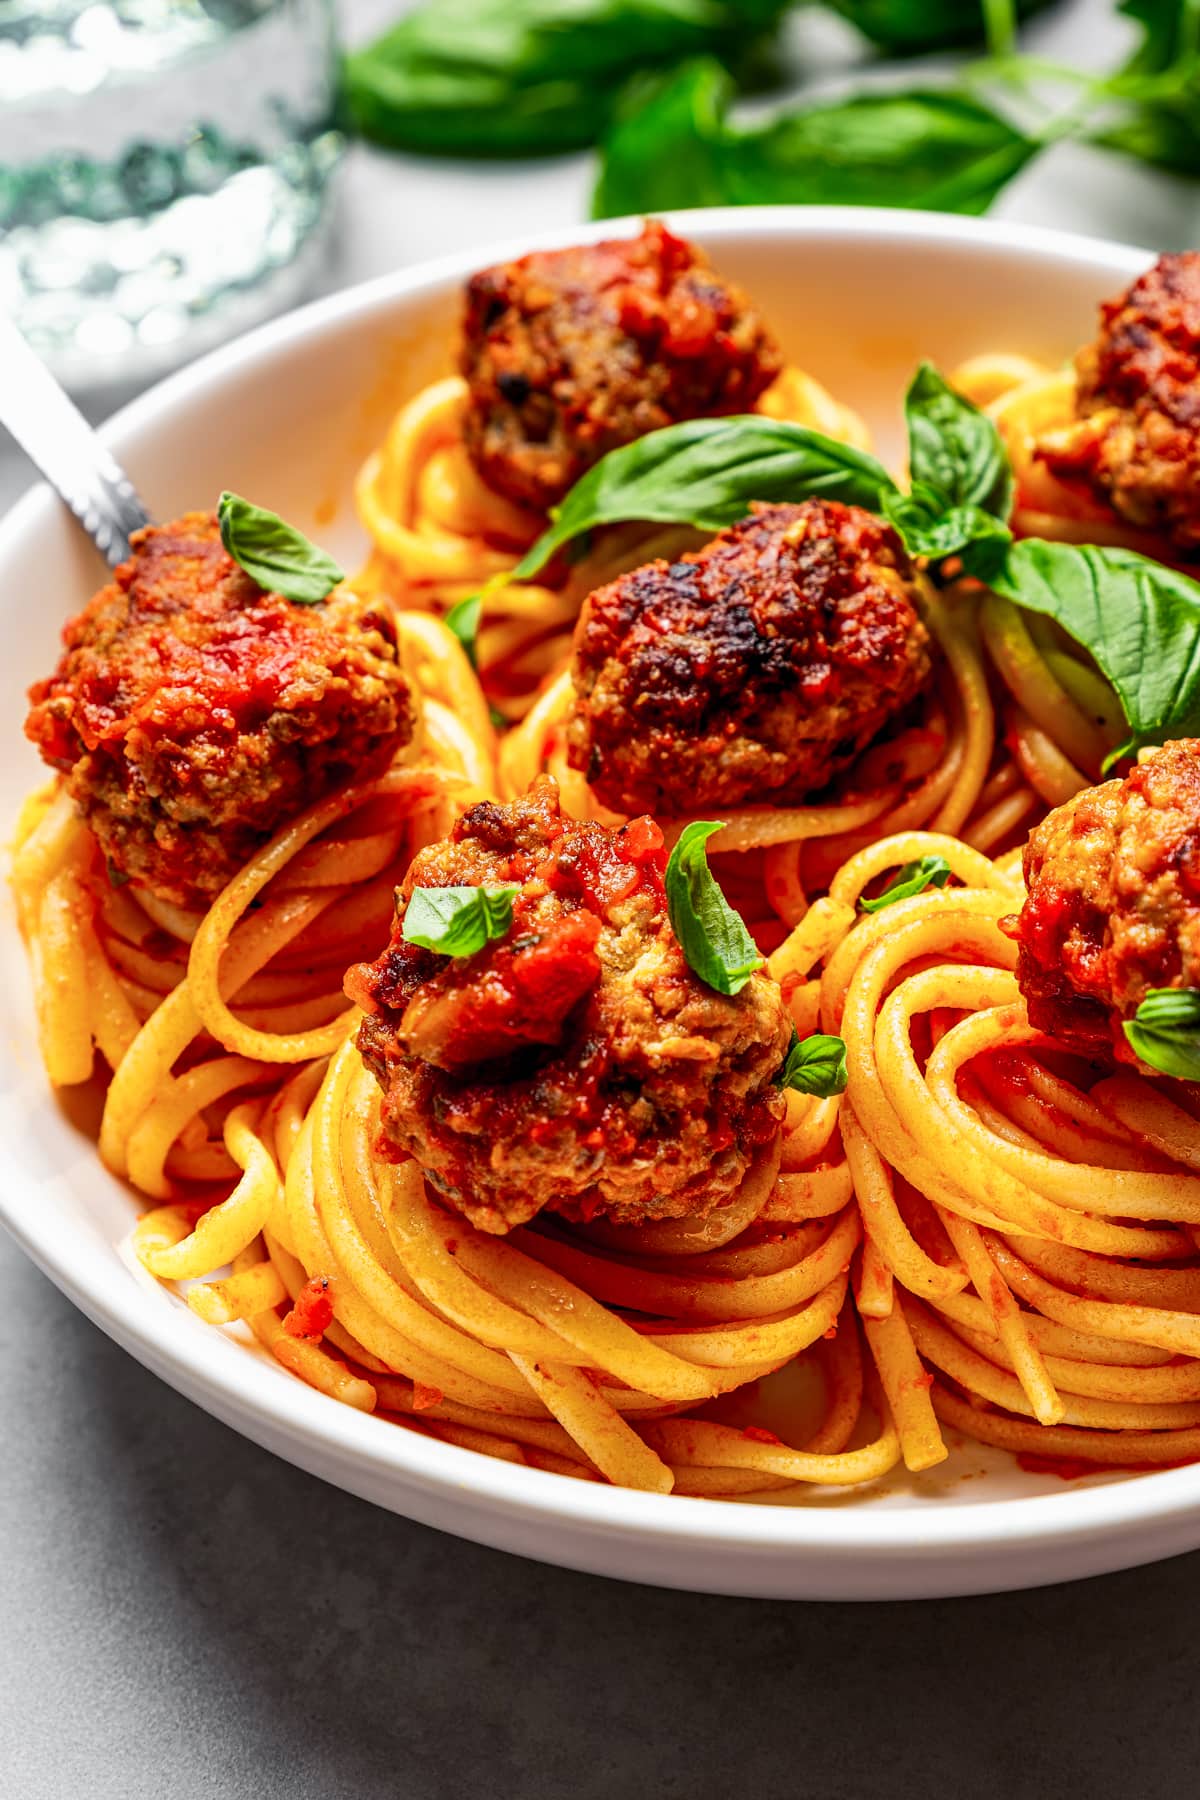 A bowl of spaghetti and pork meatballs garnished with fresh basil leaves.